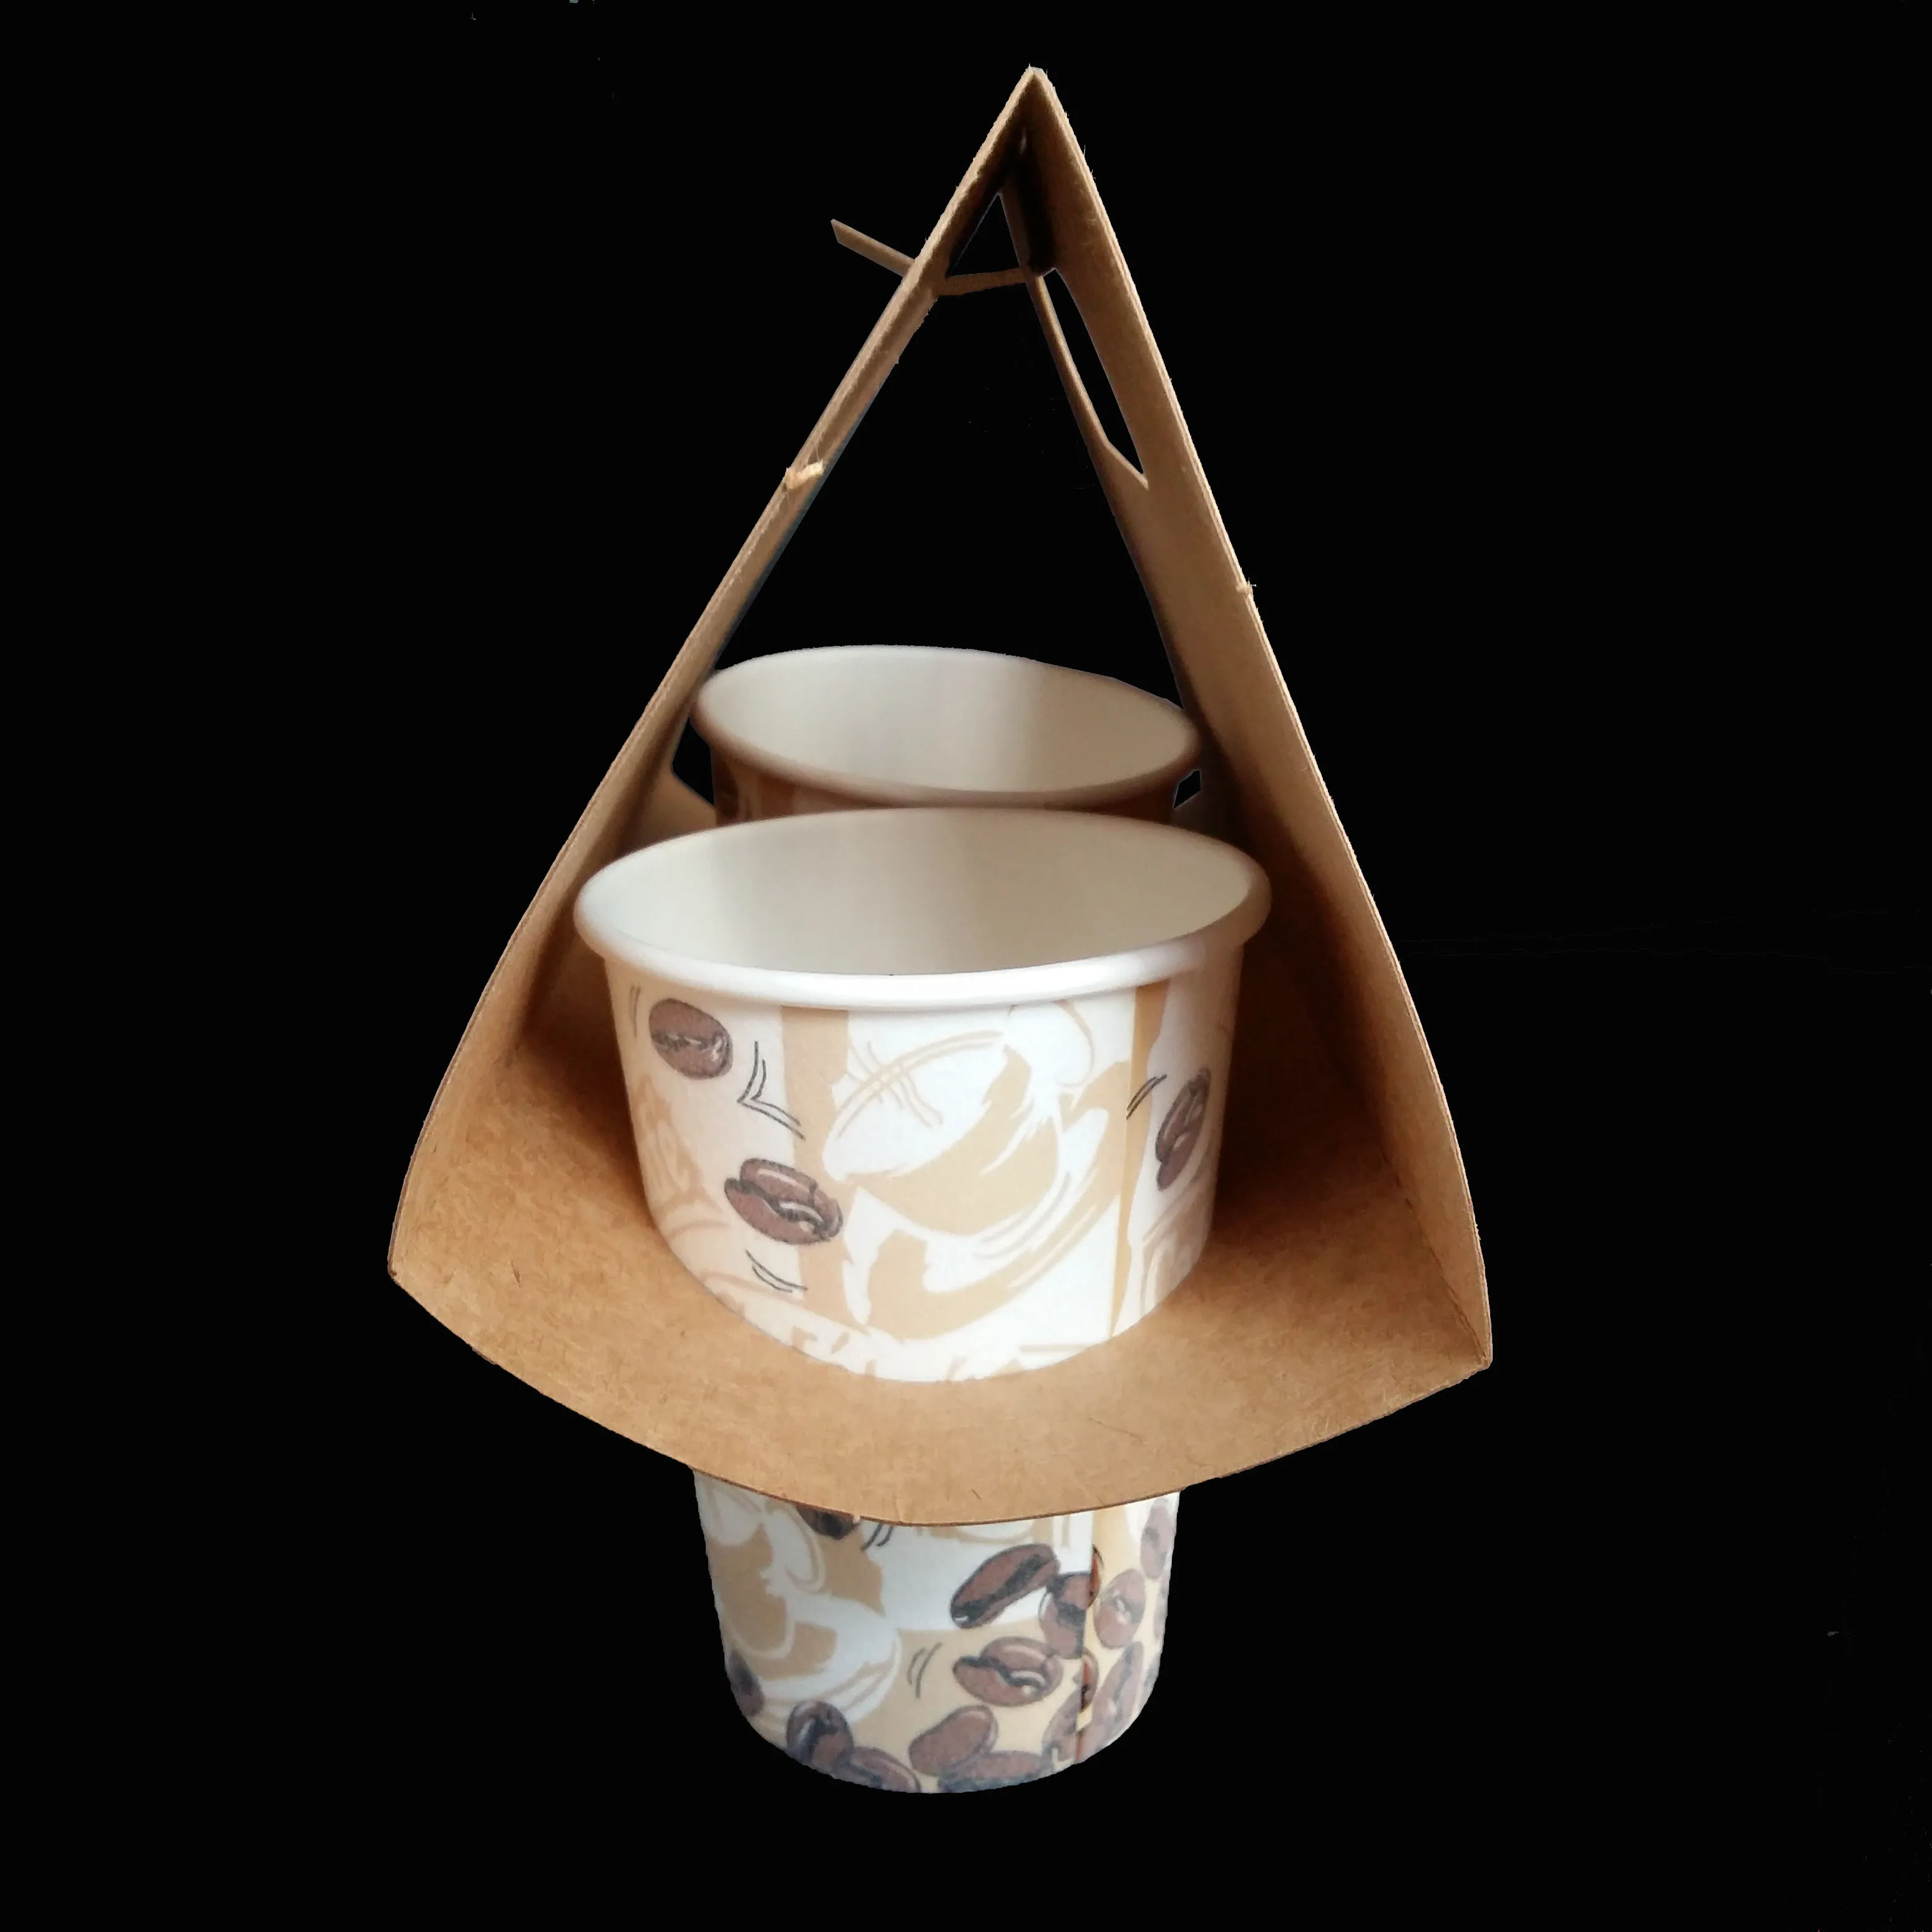 Wholesale Double 2 cups Flat packaging coffee to go cup holder paper bag  From m.